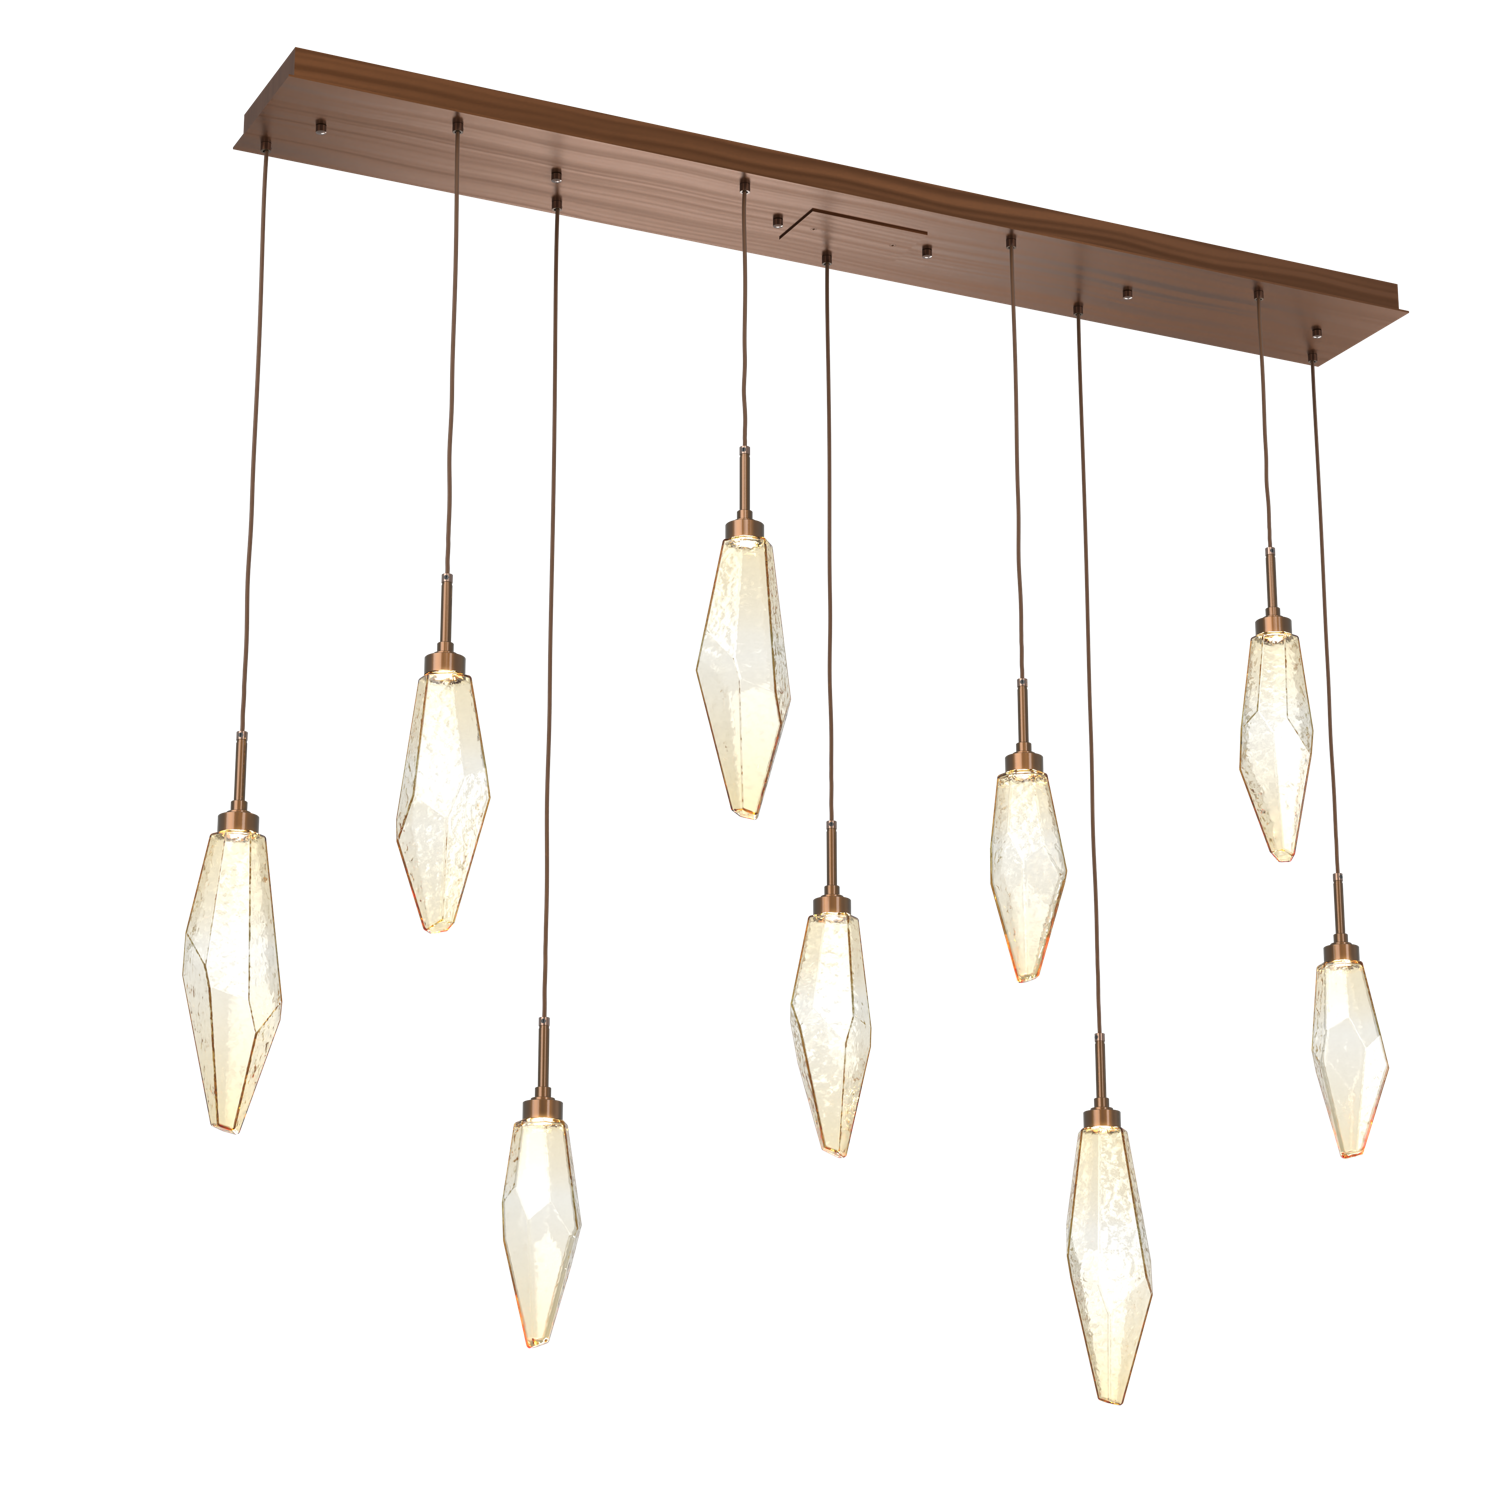 PLB0050-09-RB-CA-Hammerton-Studio-Rock-Crystal-9-light-linear-pendant-chandelier-with-oil-rubbed-bronze-finish-and-chilled-amber-blown-glass-shades-and-LED-lamping